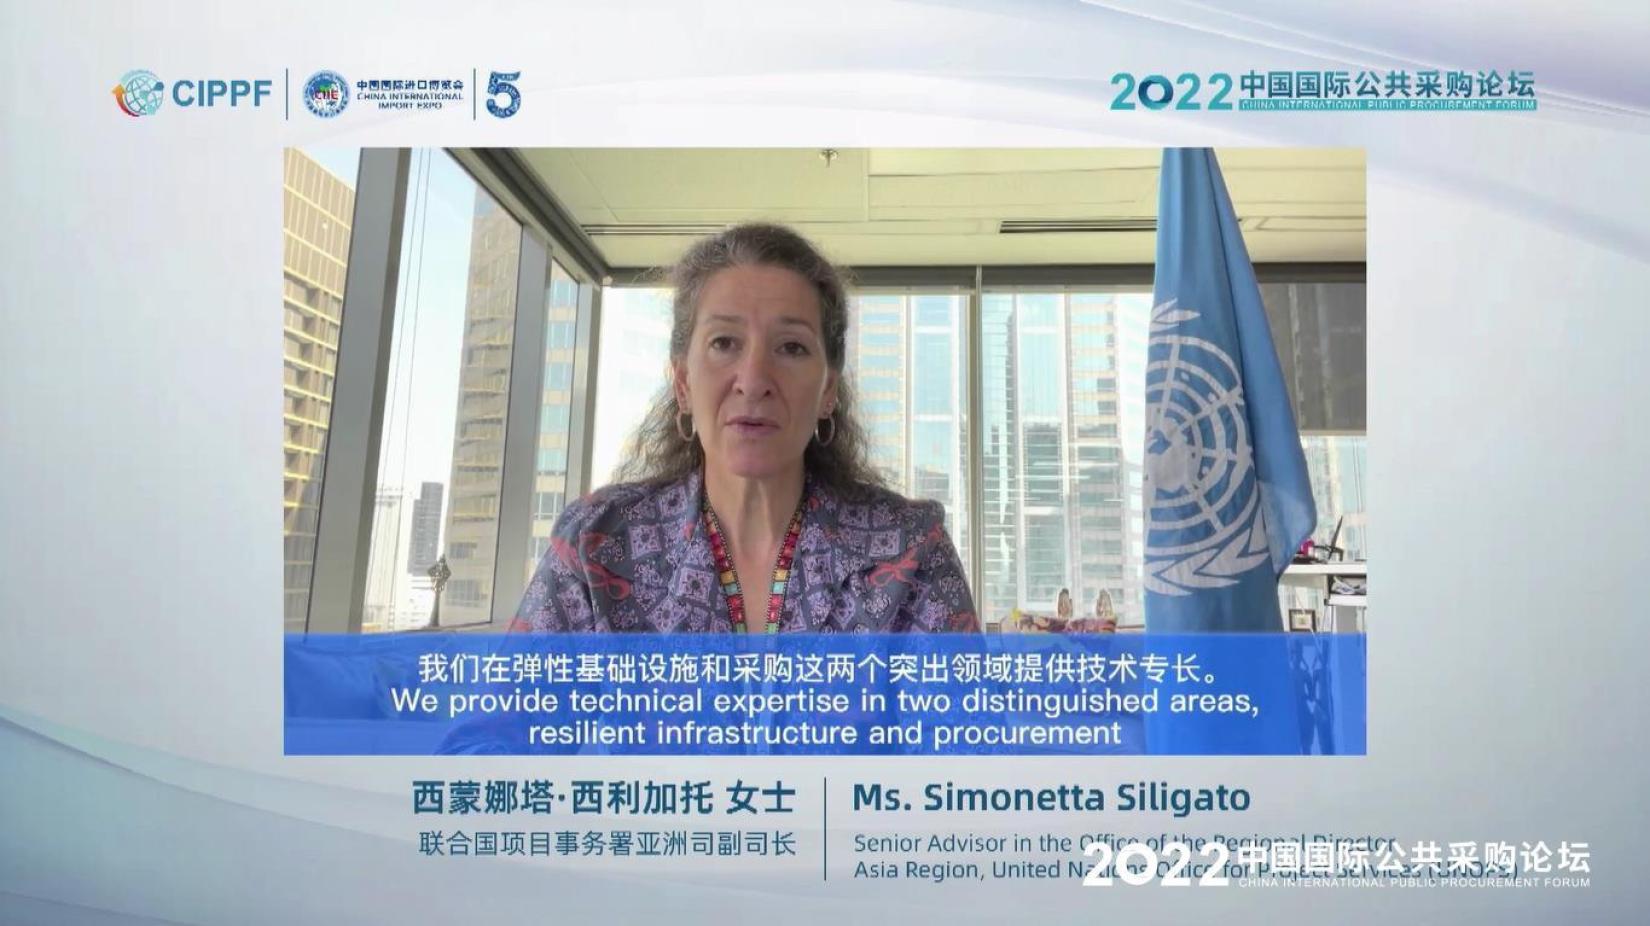 Simonetta Siligato, Senior Advisor in the Office of the Regional Director, Asia Region, United Nations Office for Project Services (UNOPS) 